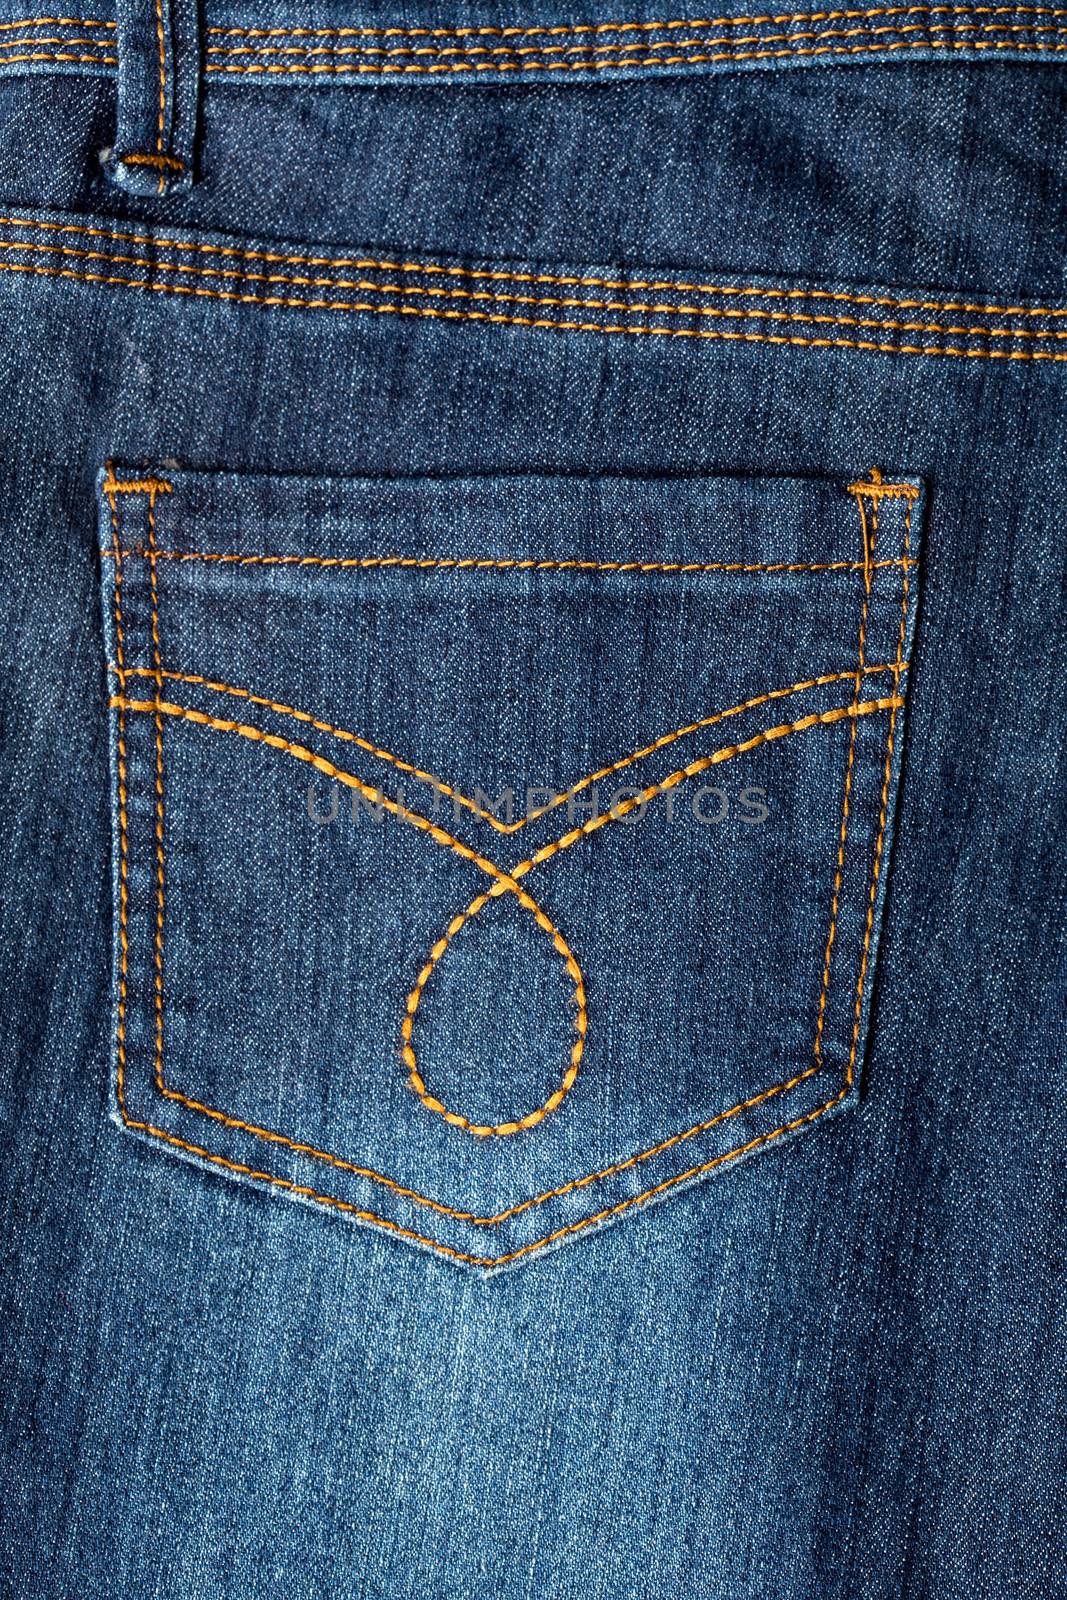 Jeans texture with seam by stockyimages